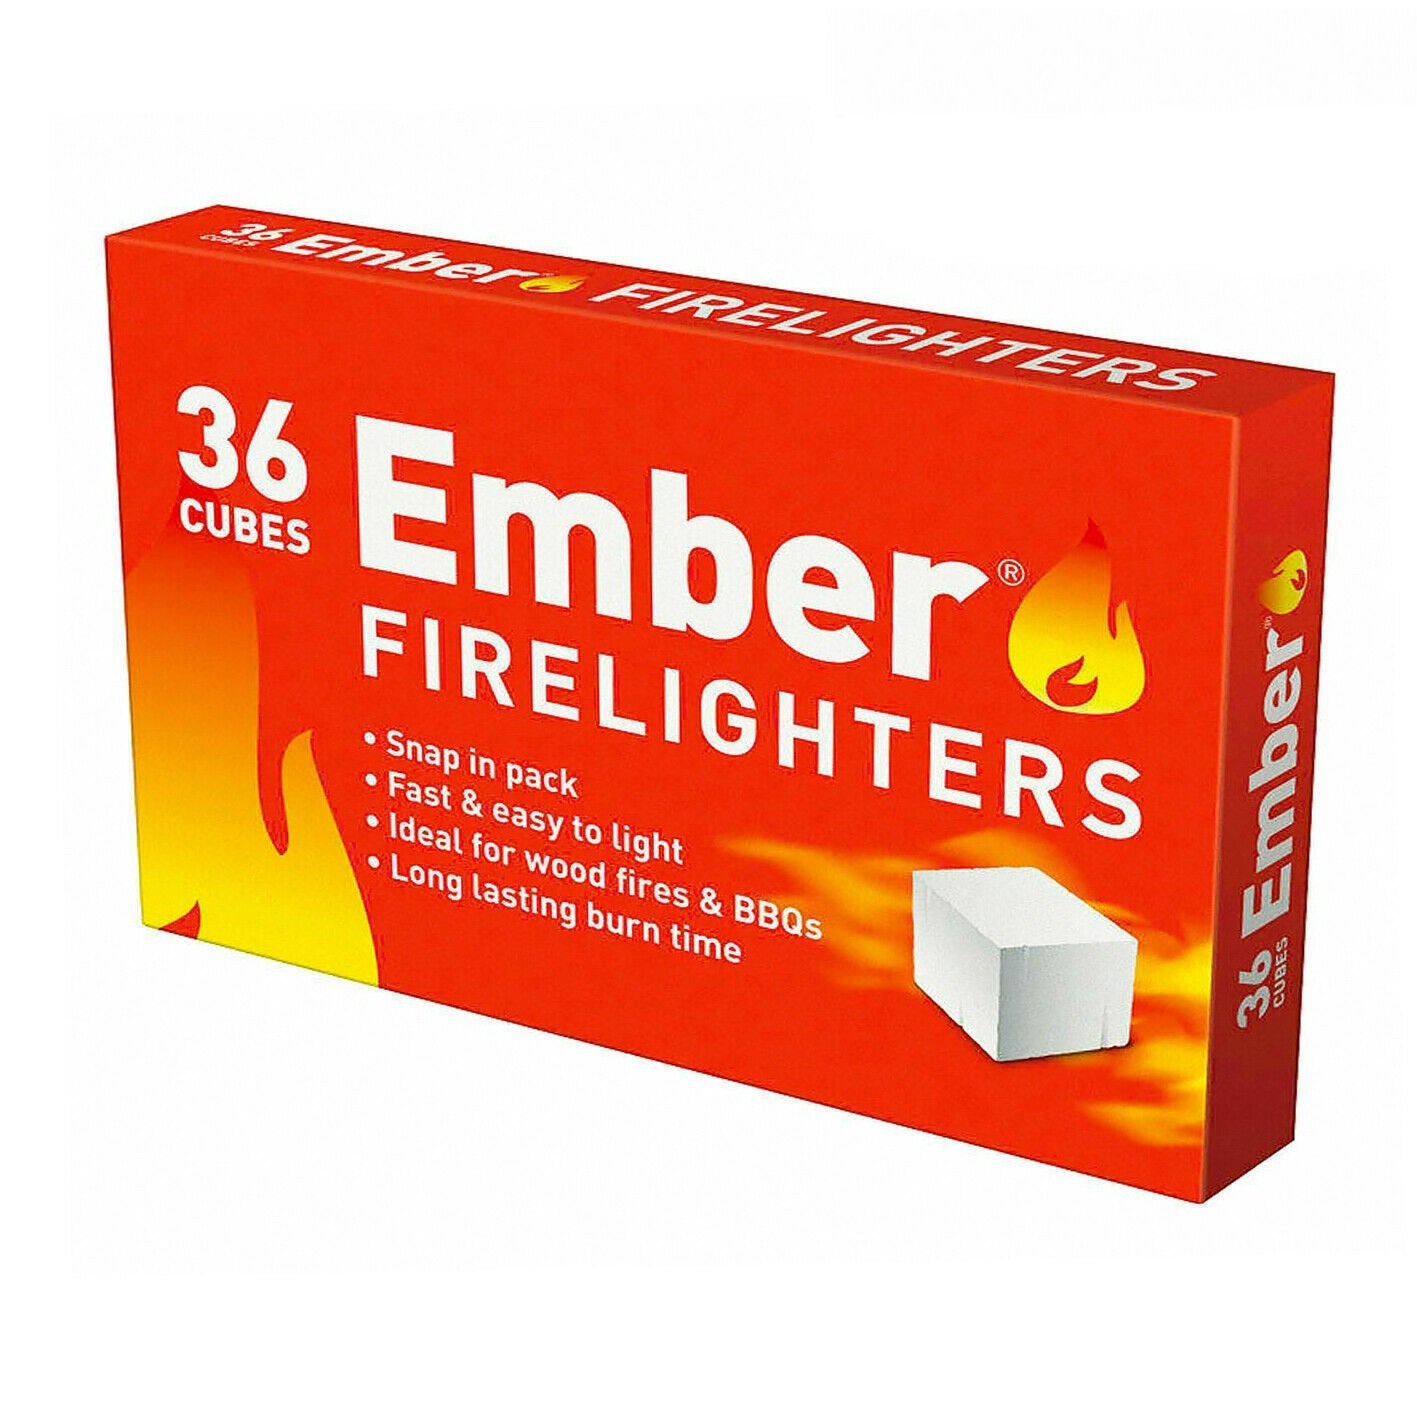 EMBER Firelighters Starter Jiffy 36Pcs Low Odour Wood Fire Kindling EMKFB36 - Double Bay Hardware